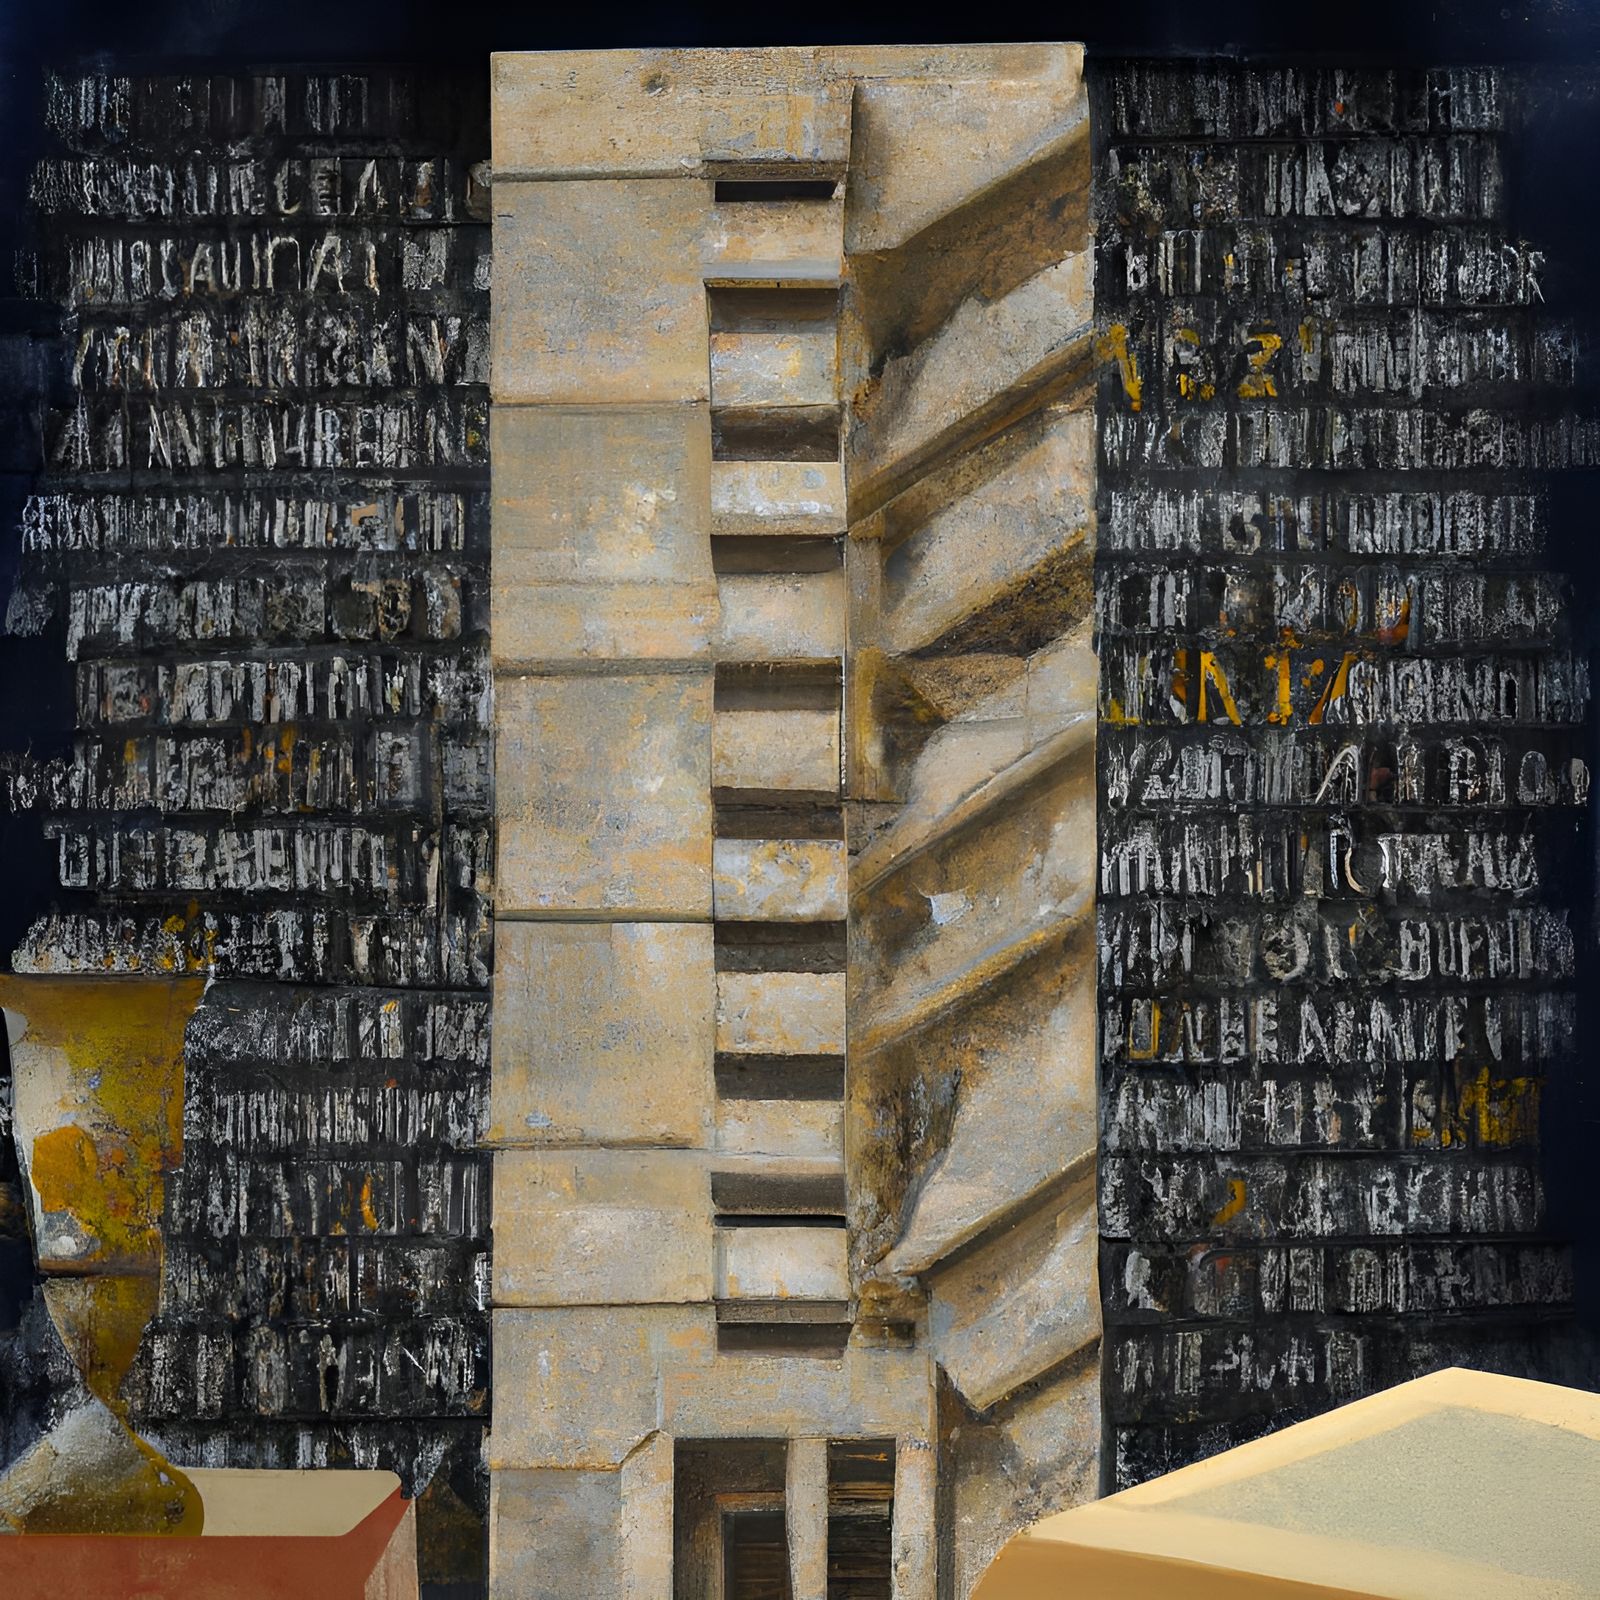 The Library of Babel, Jorge Luis Borges 